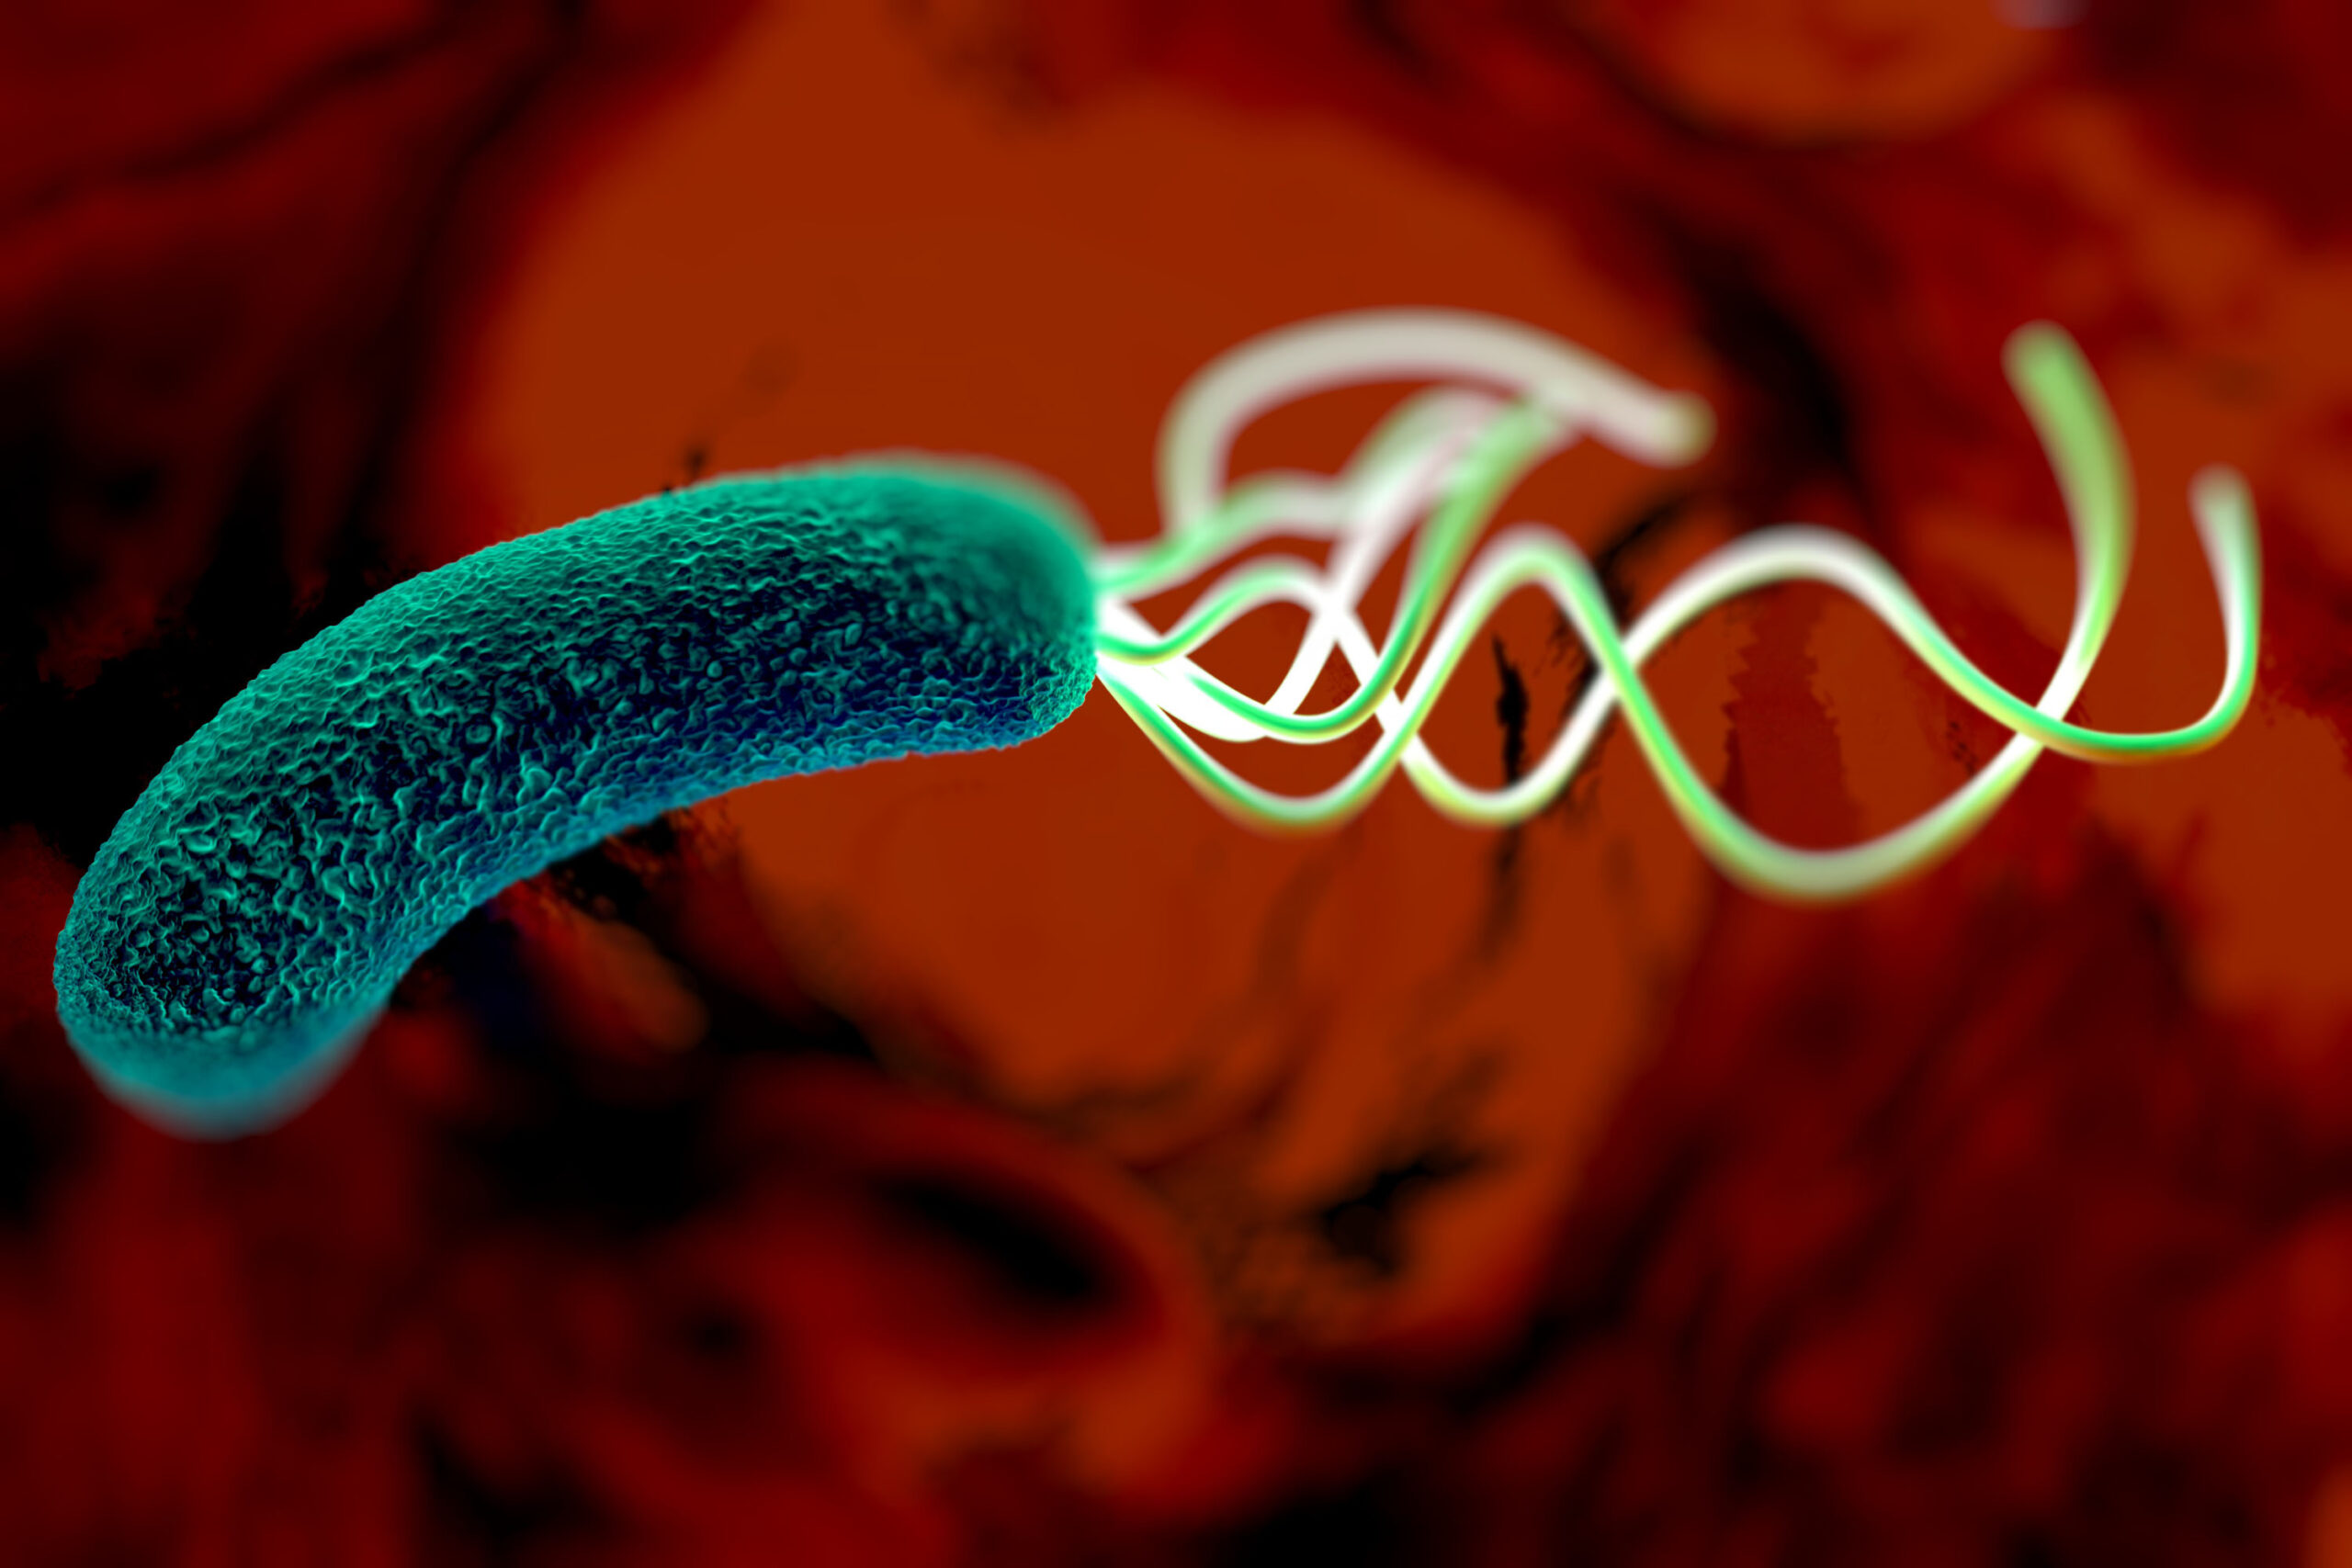 H. pylori bacteria are a major cause of peptic ulcers and stomach cancer. Photo via Shutterstock.com